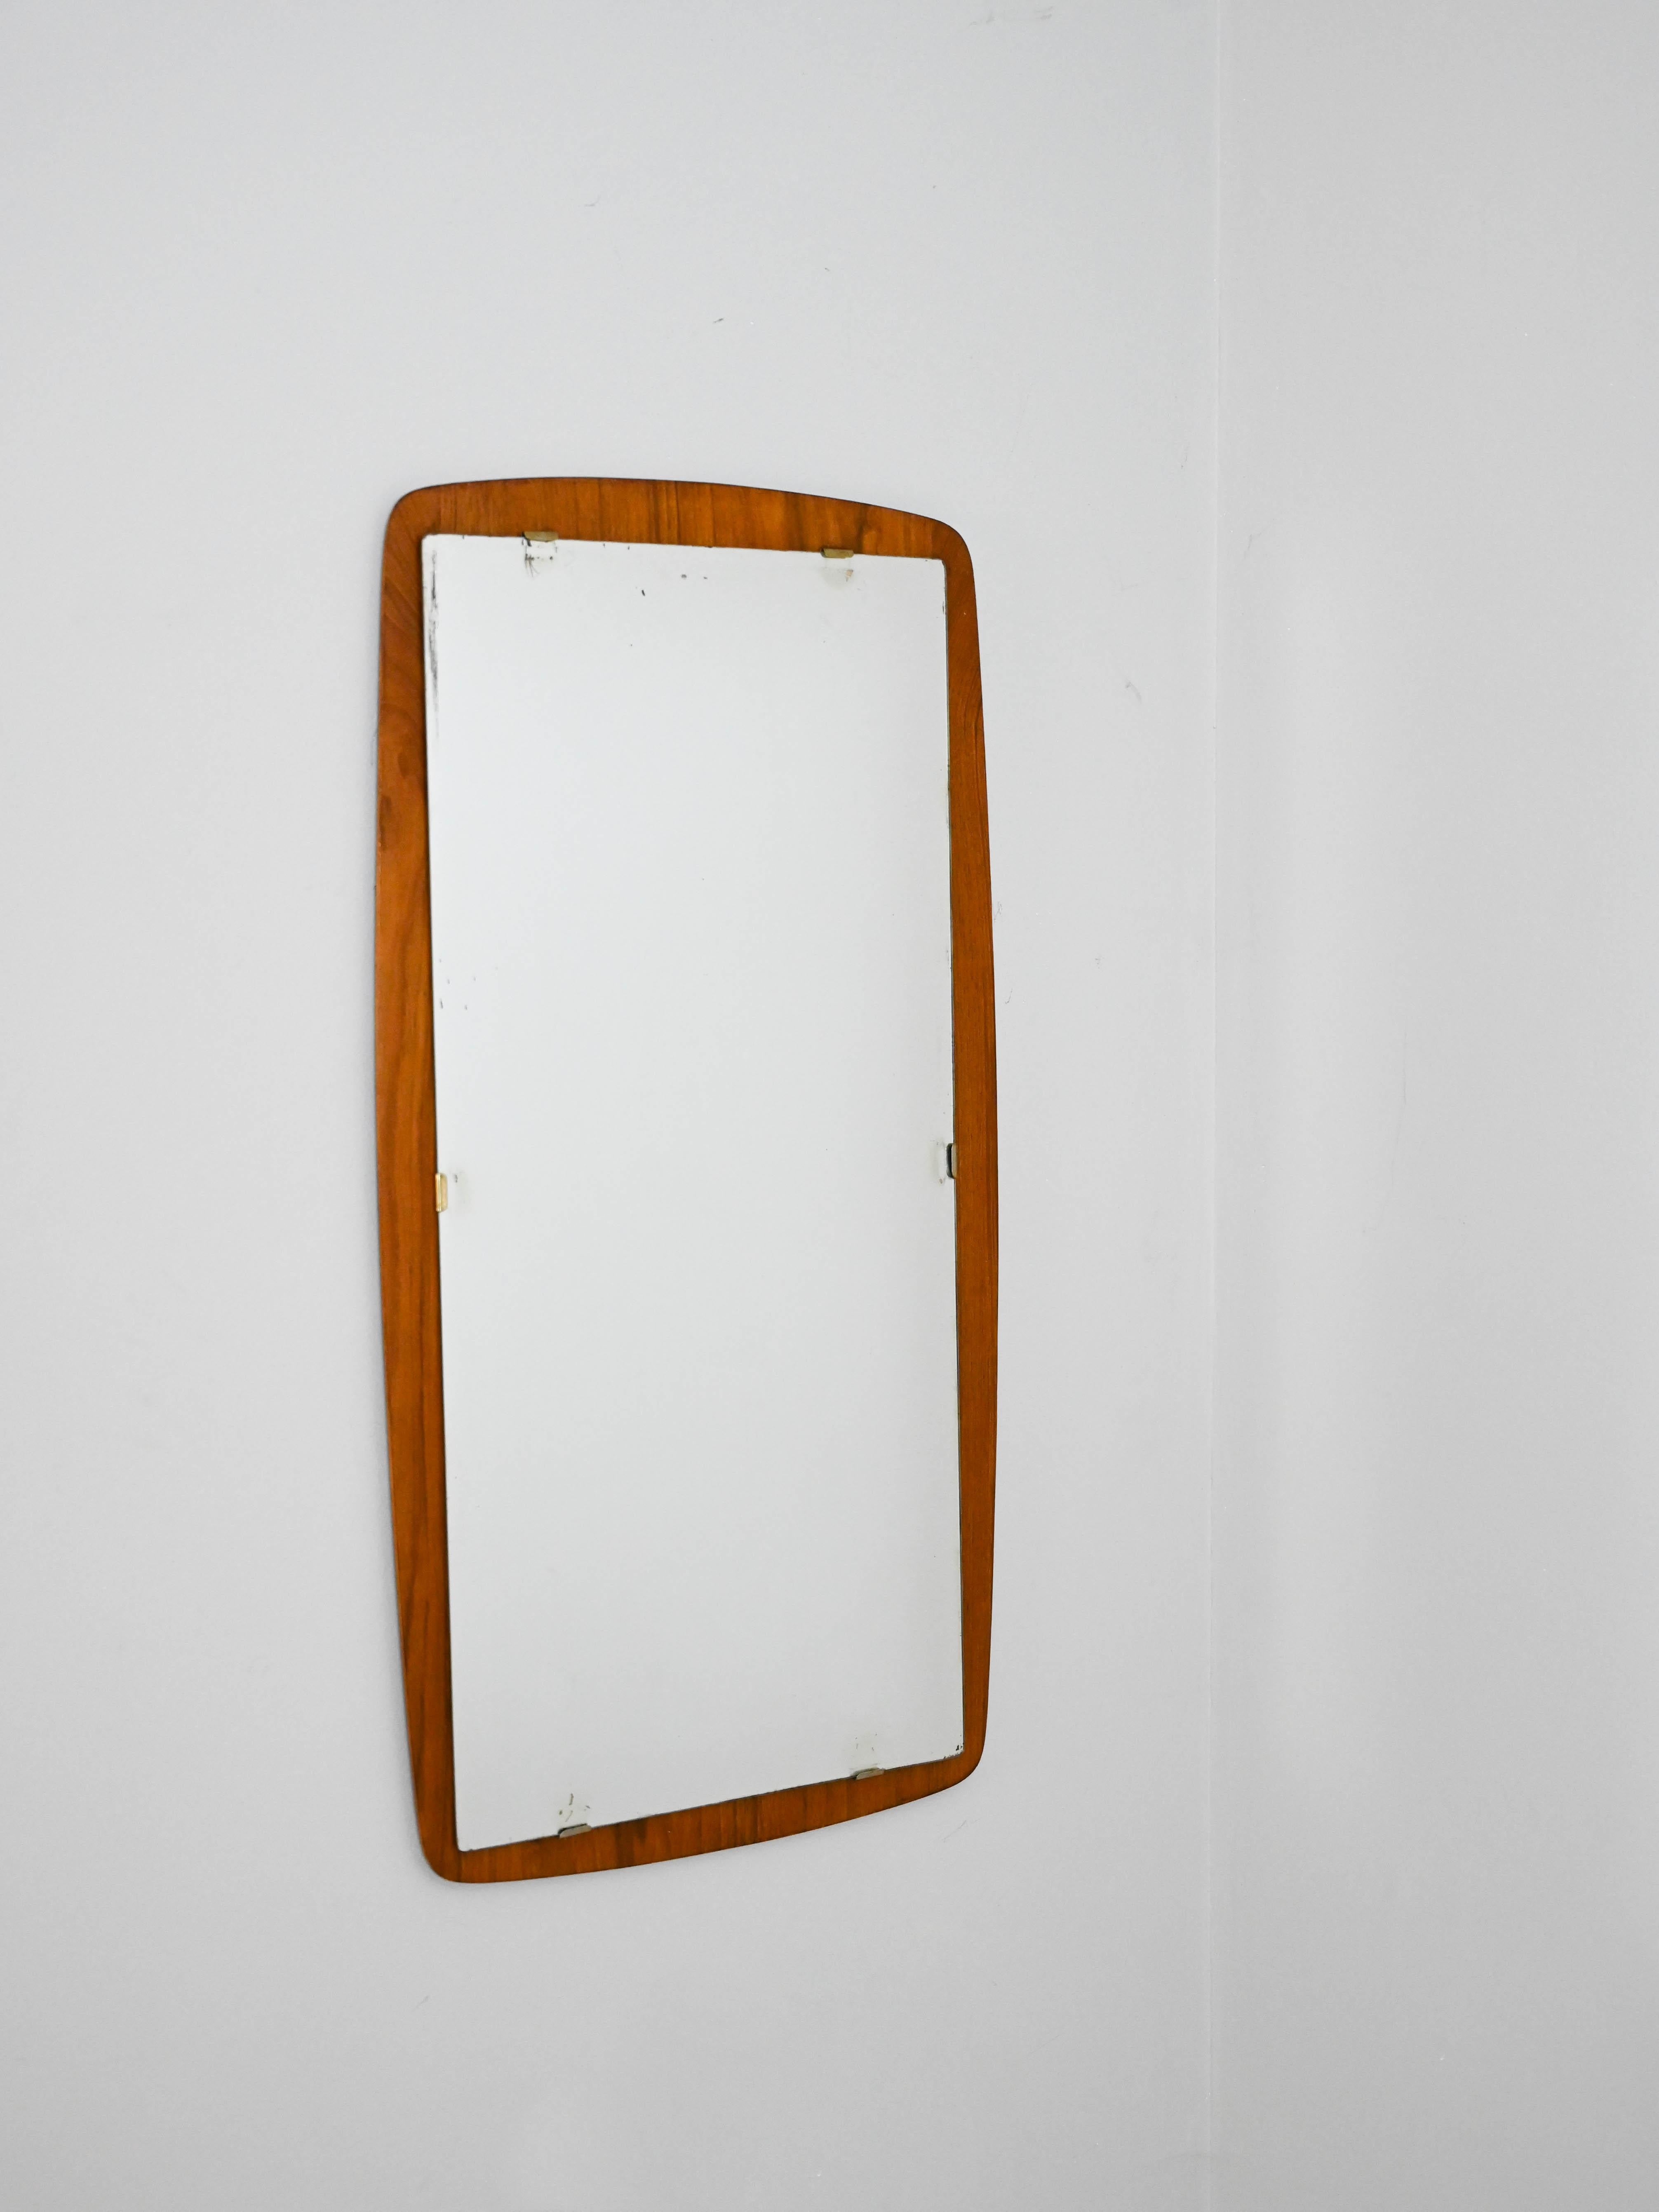 Mirror with curved teak frame.

A simple, lightweight mirror with a teak frame on which the mirror rests.
Perfect for any room, try it in the entryway with a small table or bench underneath, in perfect Scandinavian style.

Good condition.